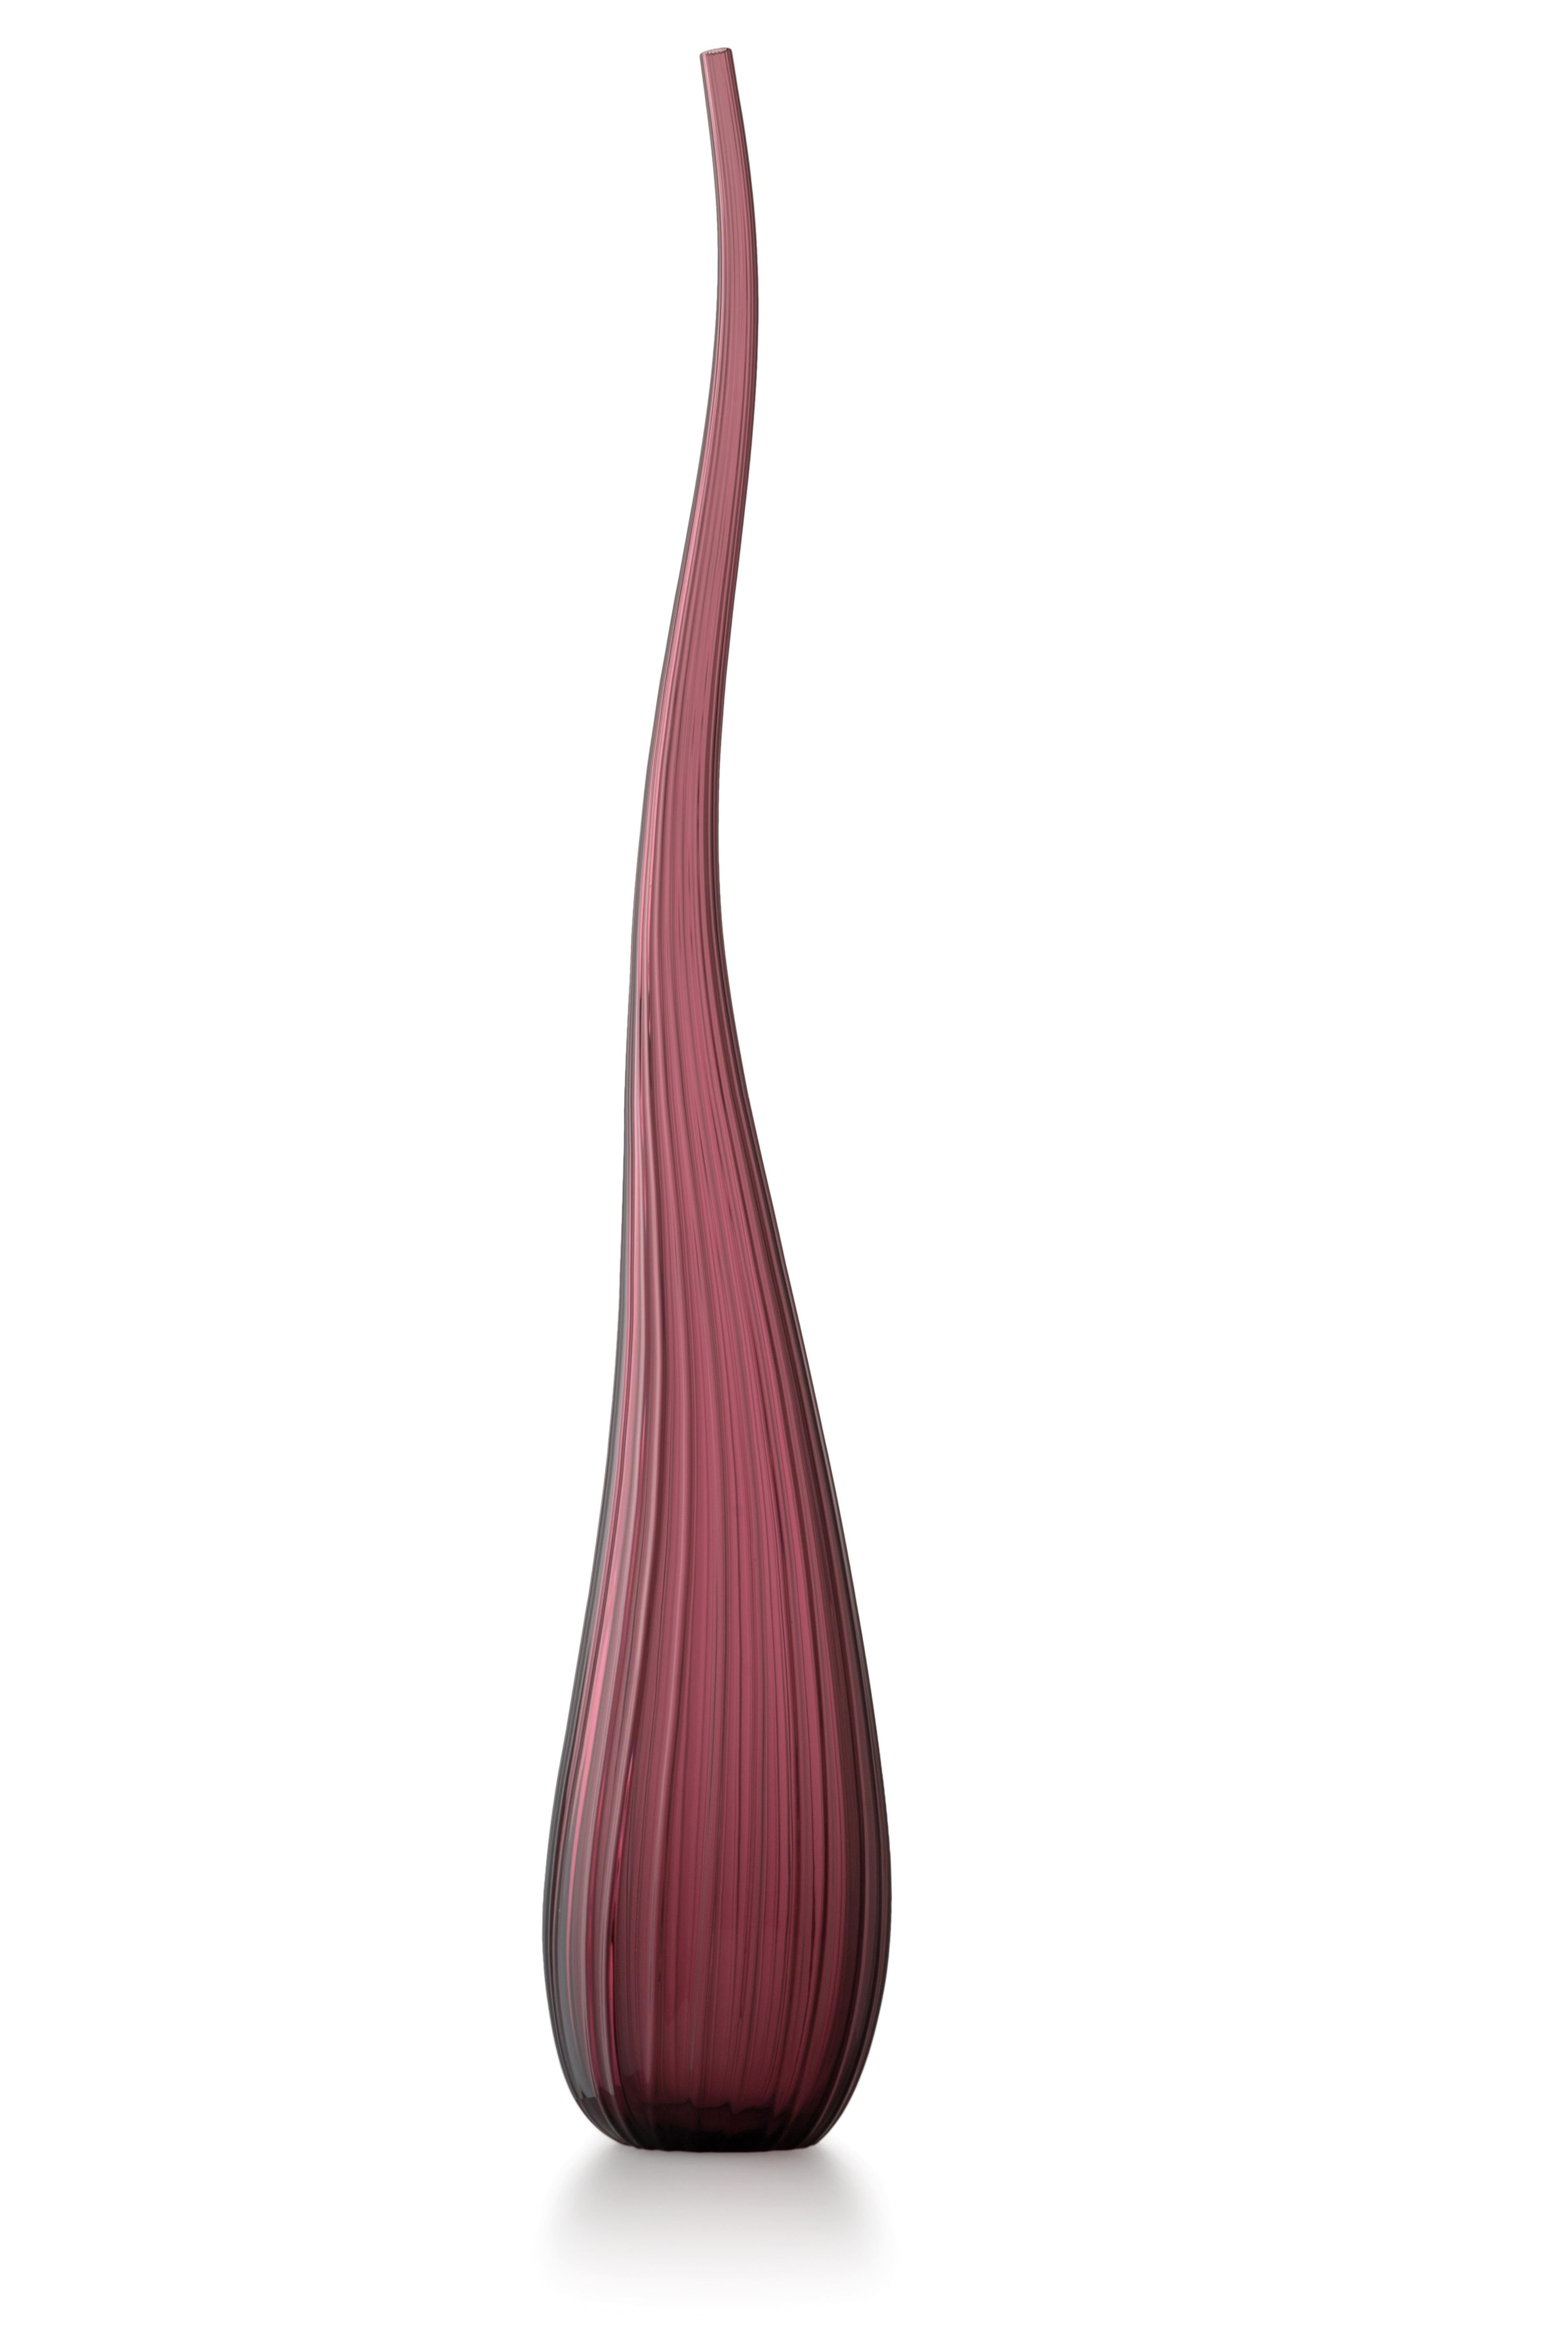 Purple (3698) Large Aria Lucido Vase in Hand Blown Murano Glass by Renzo Stellon